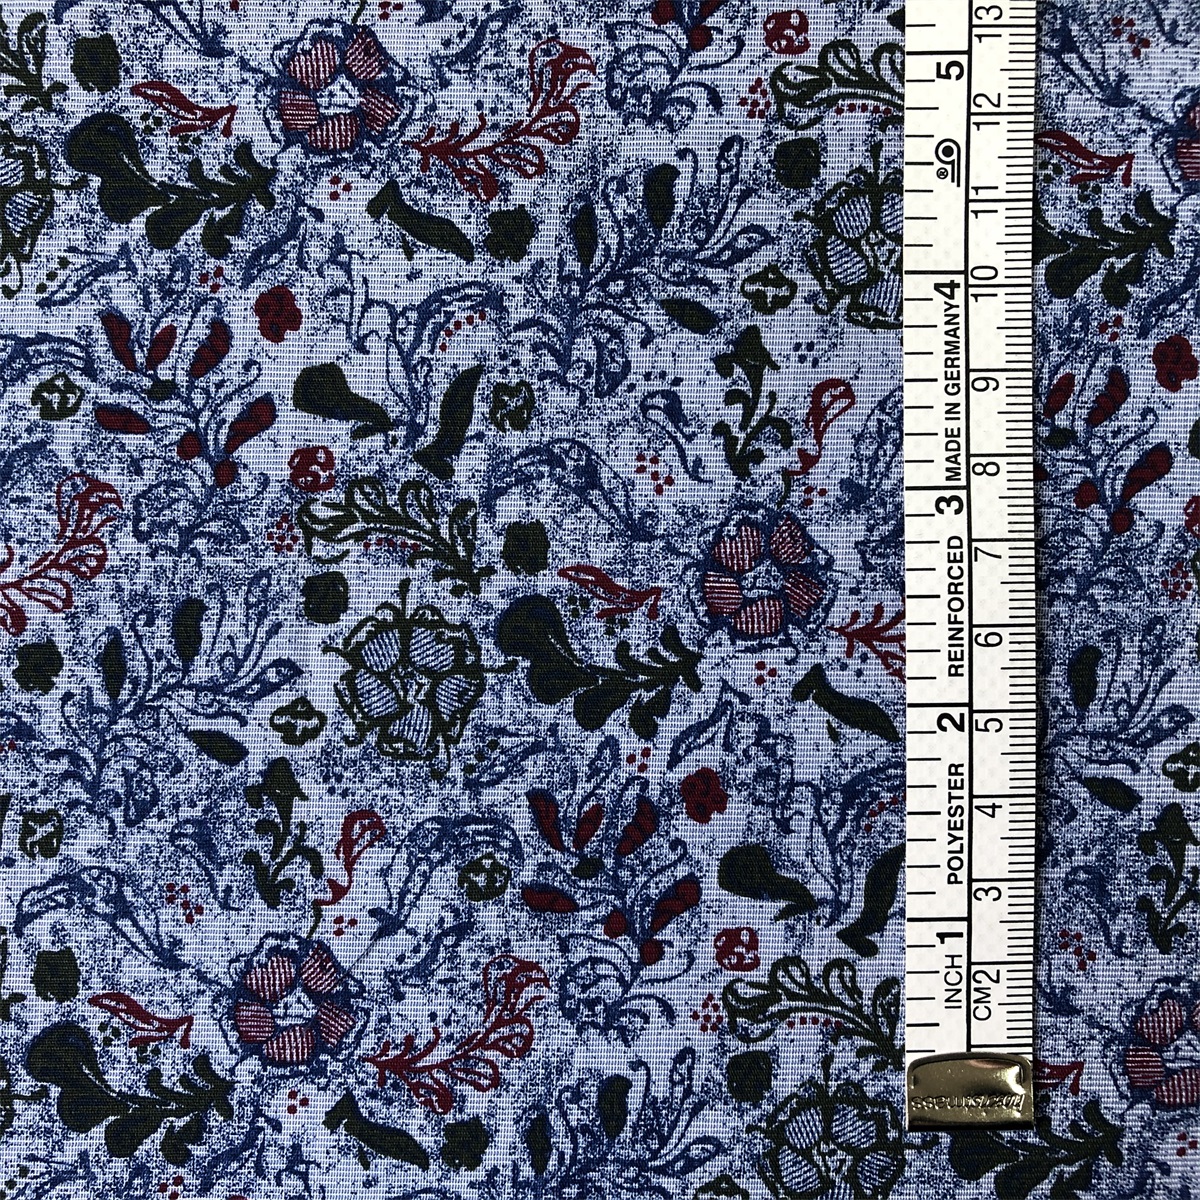 Hot sale Cotton Fabric for men's casual shirts 100% cotton printed on yarn dyed fil-a-fil plain woven shirts fabric